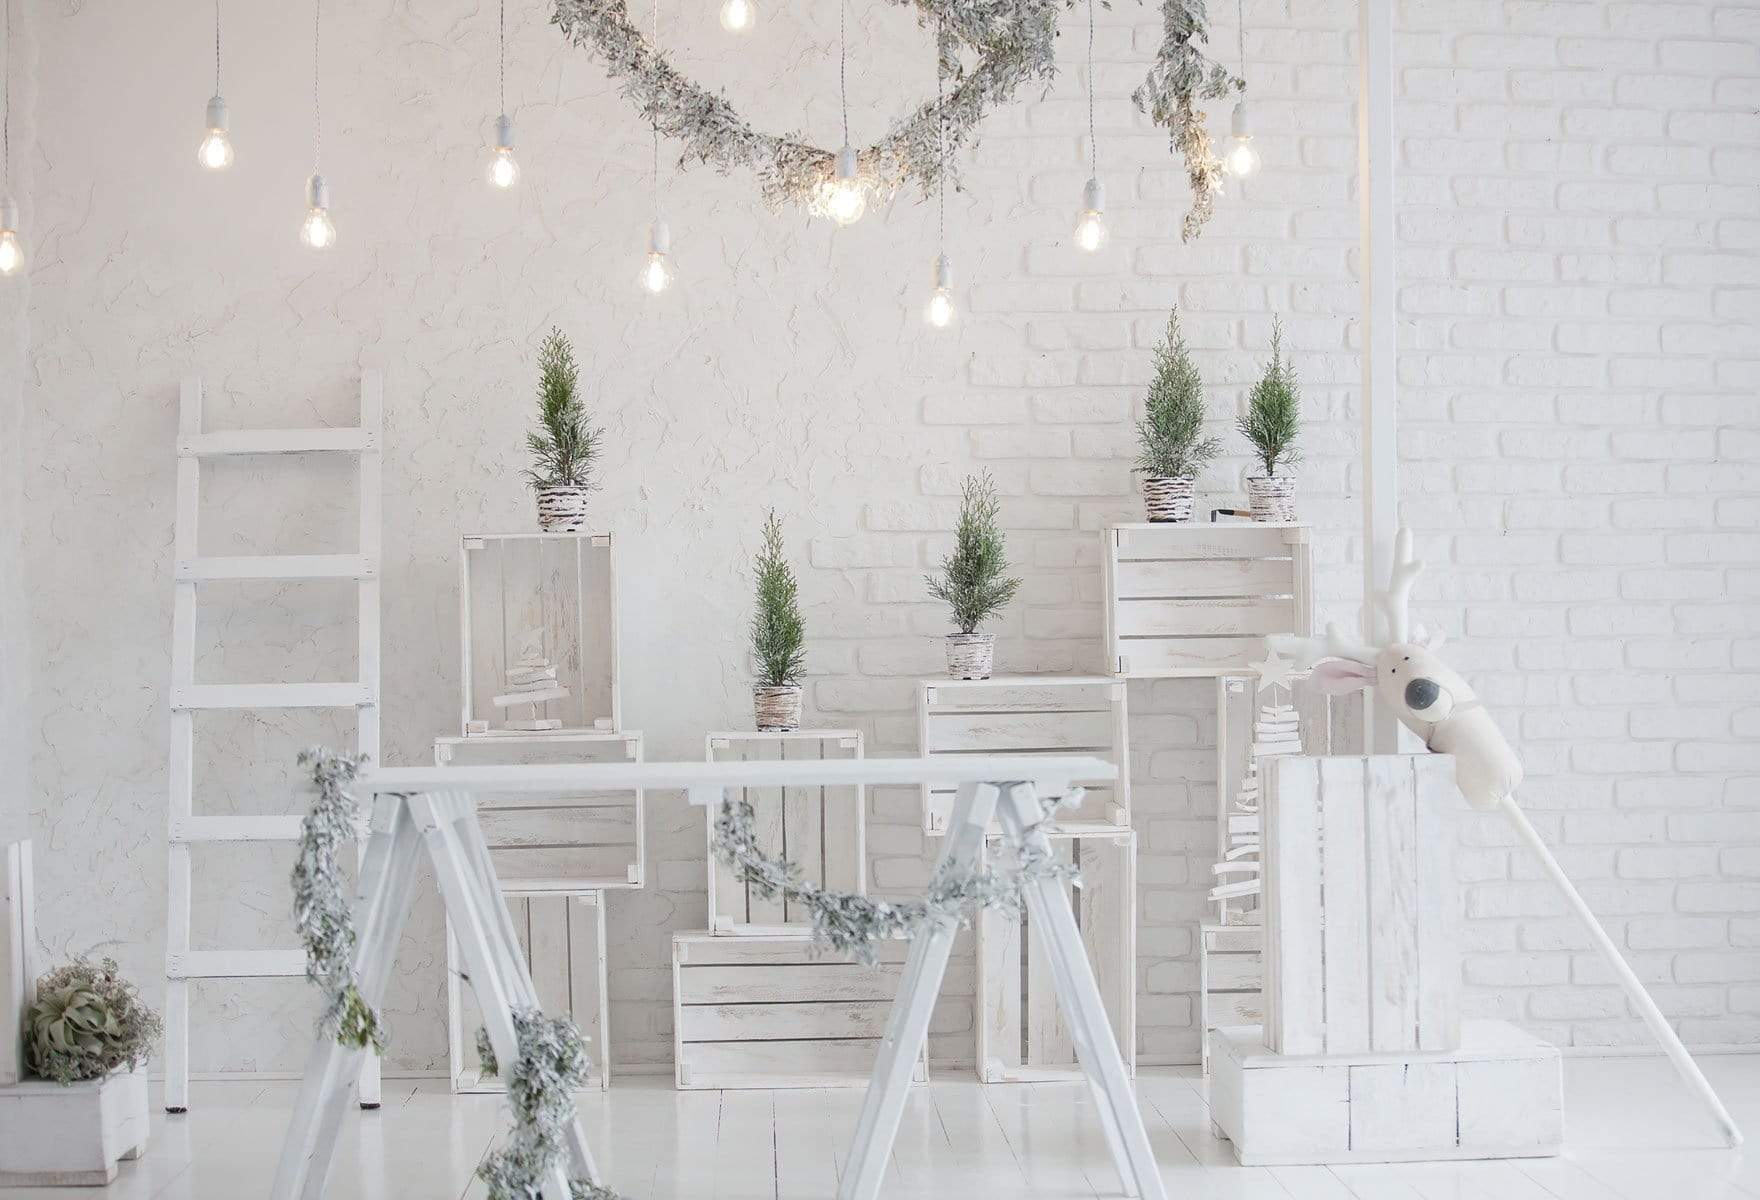 Kate Christmas White Room with Potted Plant Decorations Backdrop